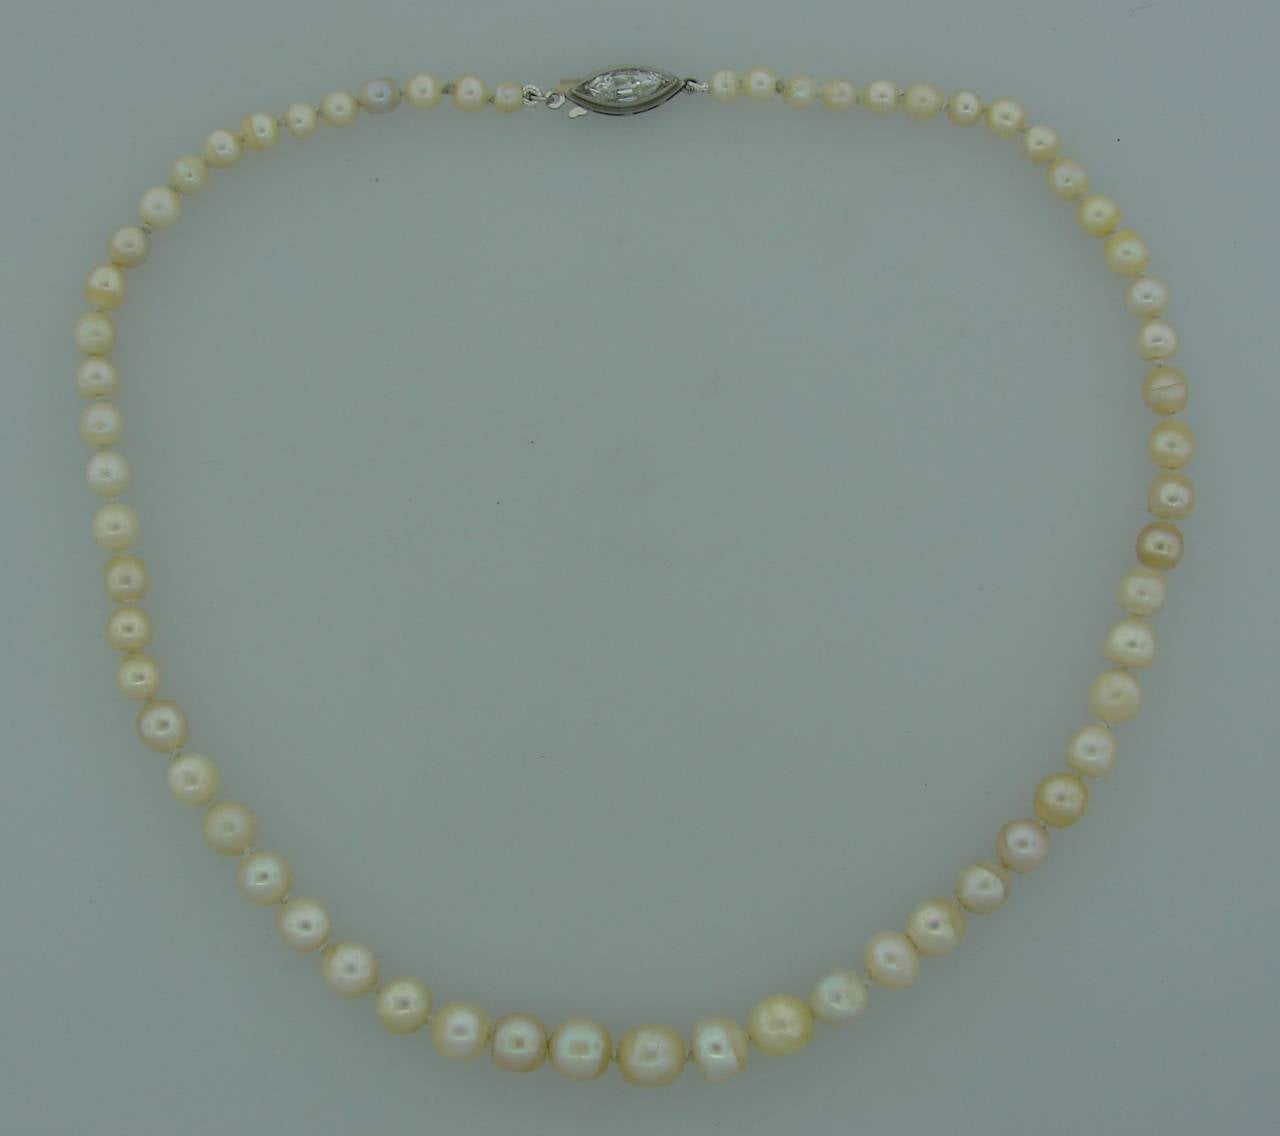 Classy and timeless pearl strand finished with diamond and platinum clasp. Features sixty one natural saltwater pearl. Originally the pearls were in a different necklace that was restrung. That original necklace came with a GIA natural pearl